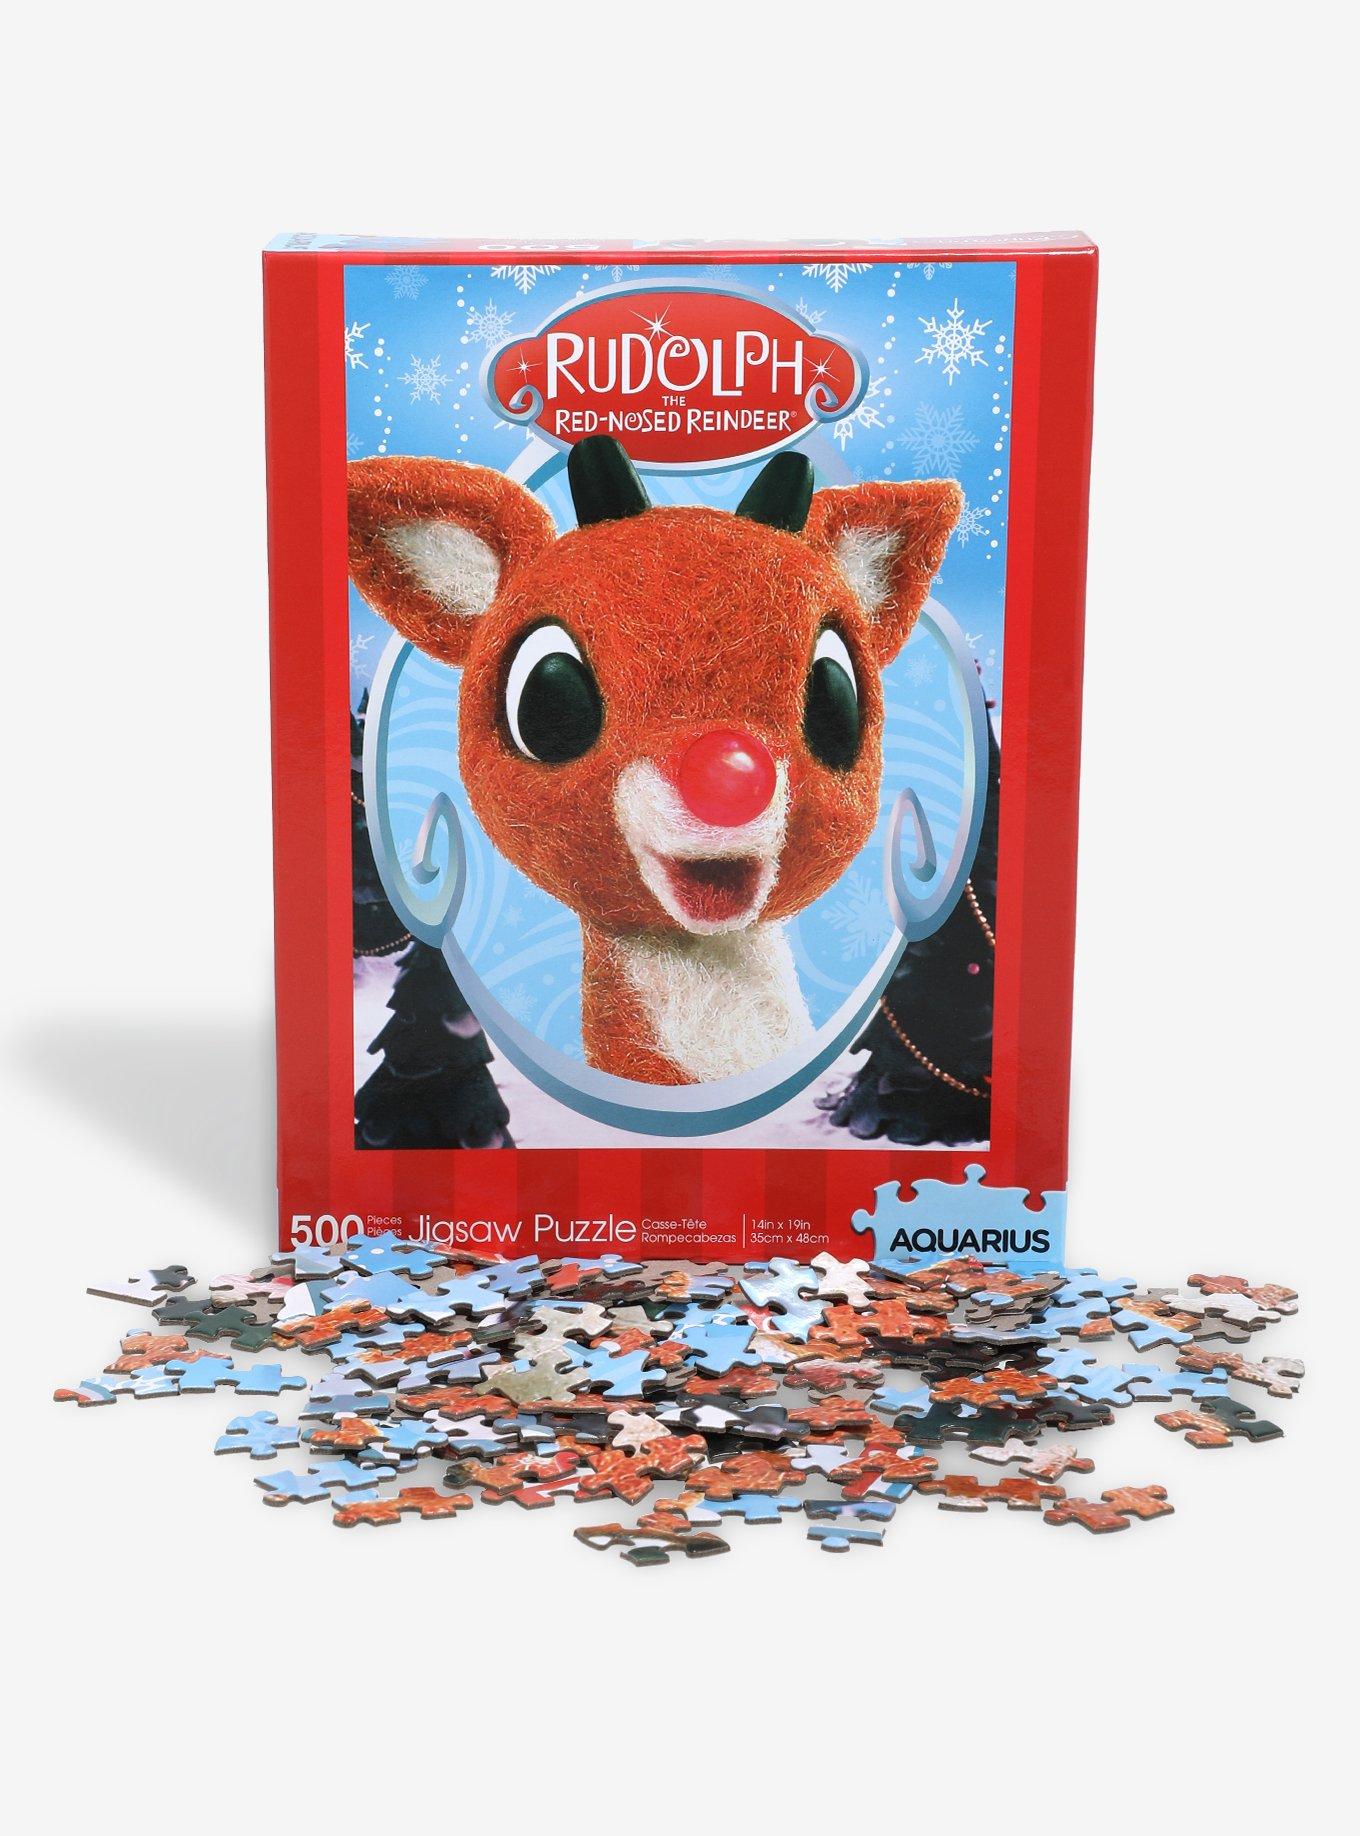 Rudolph The Red-Nosed Reindeer Portrait Puzzle